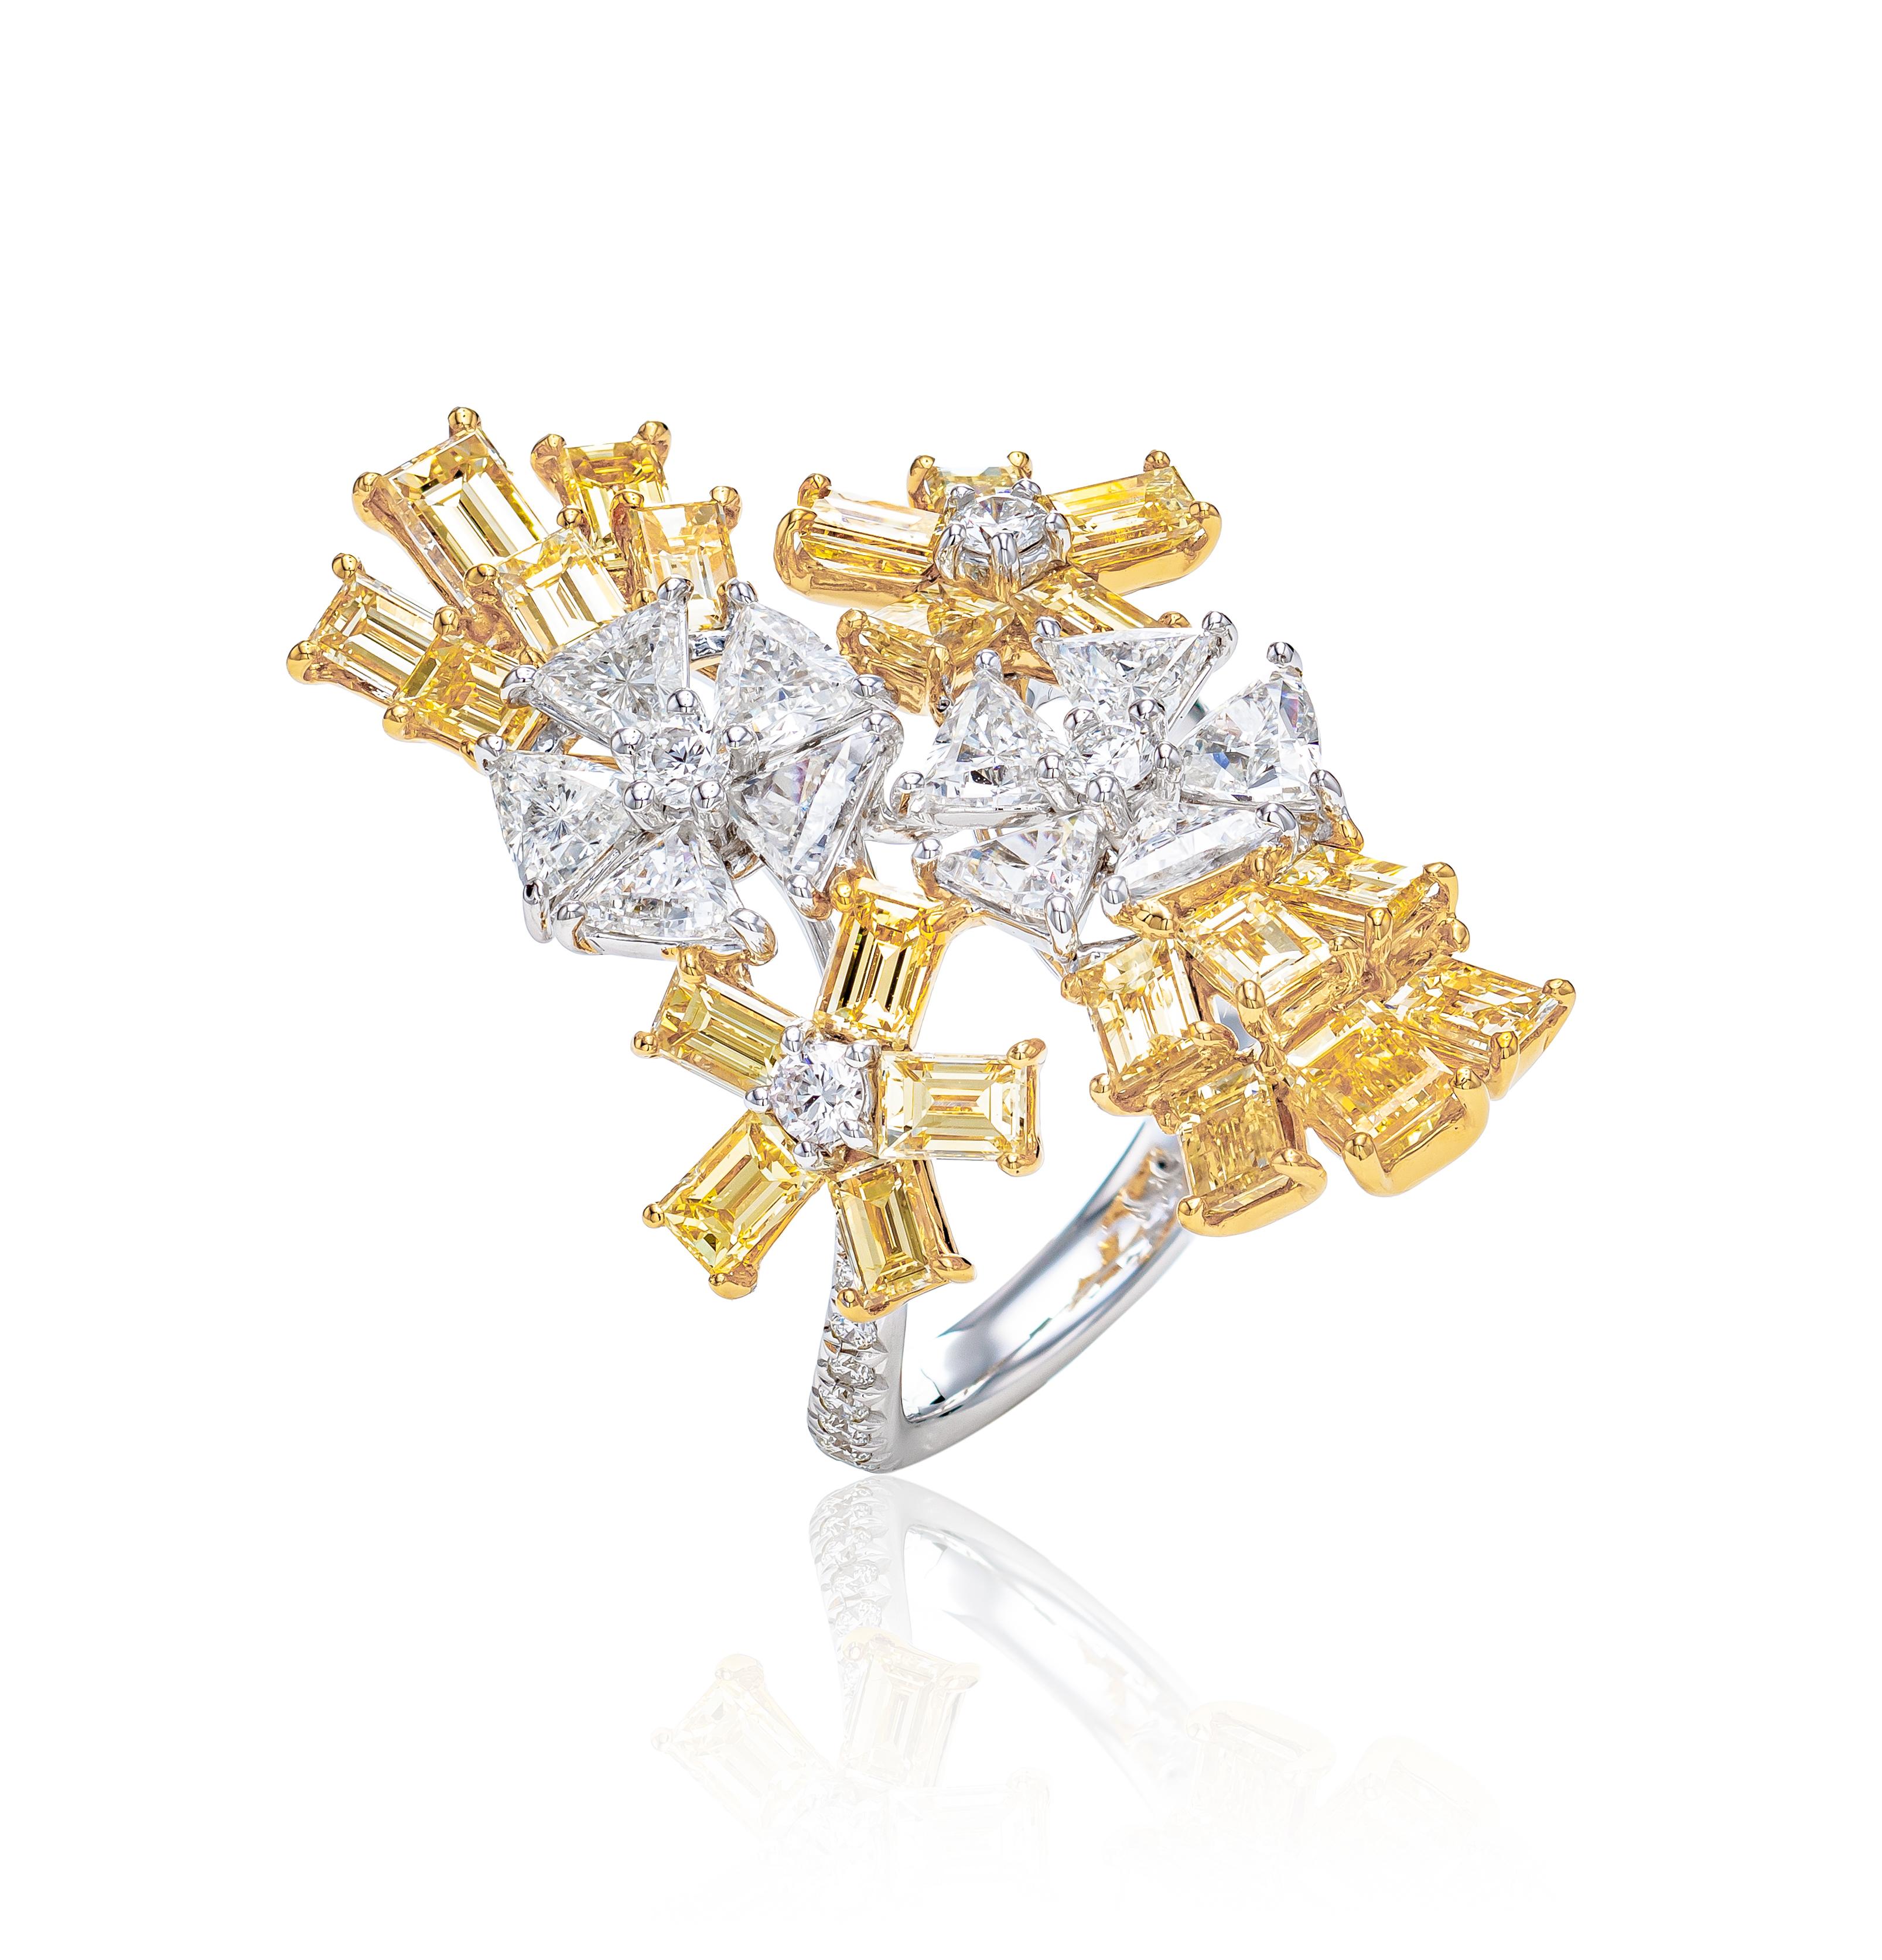 Contemporary 5.39 Carat Floral Wrap Fancy Yellow and White Diamond Ring in 18K Gold For Sale